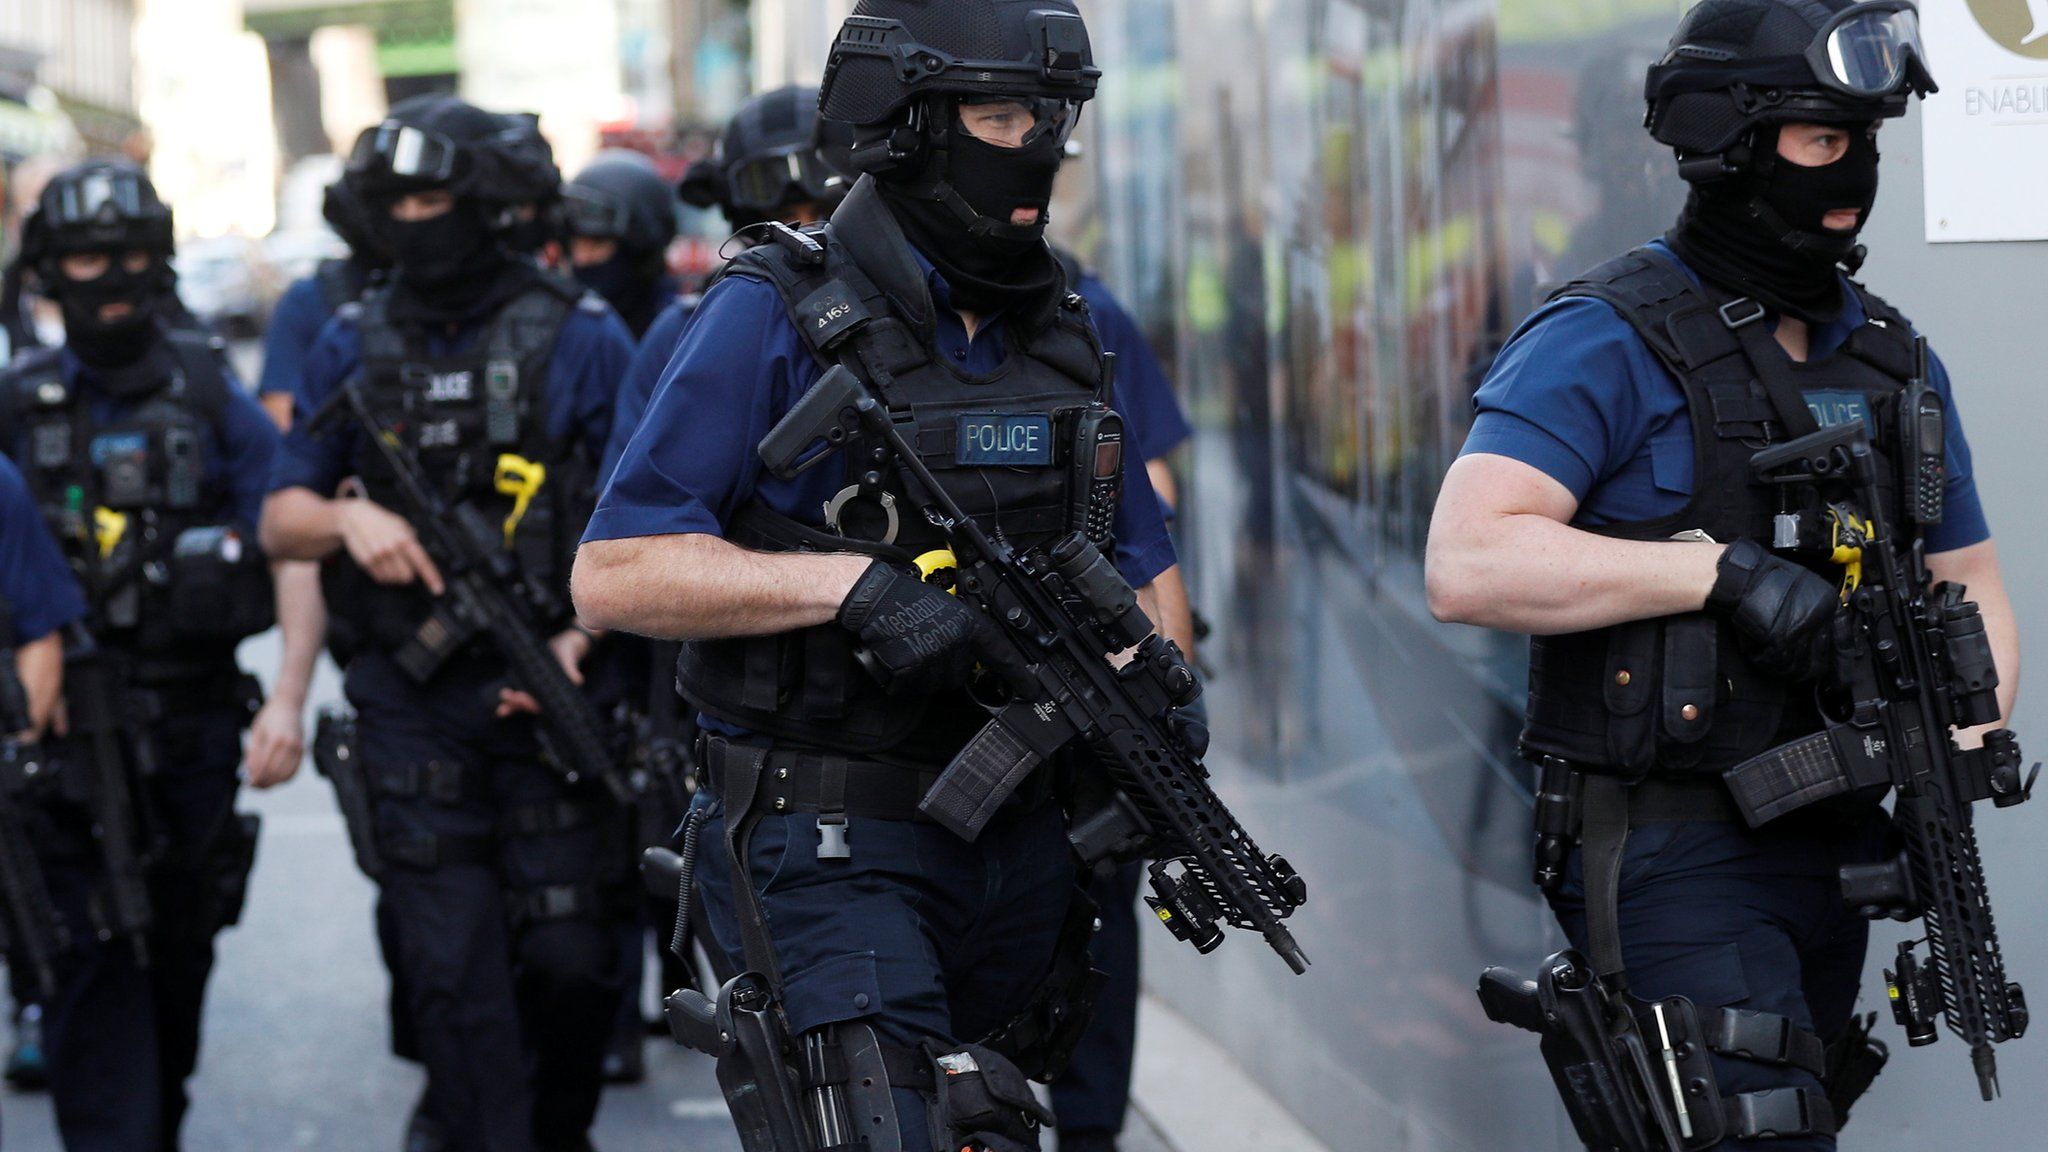 Armed police deployed following the London Bridge attack